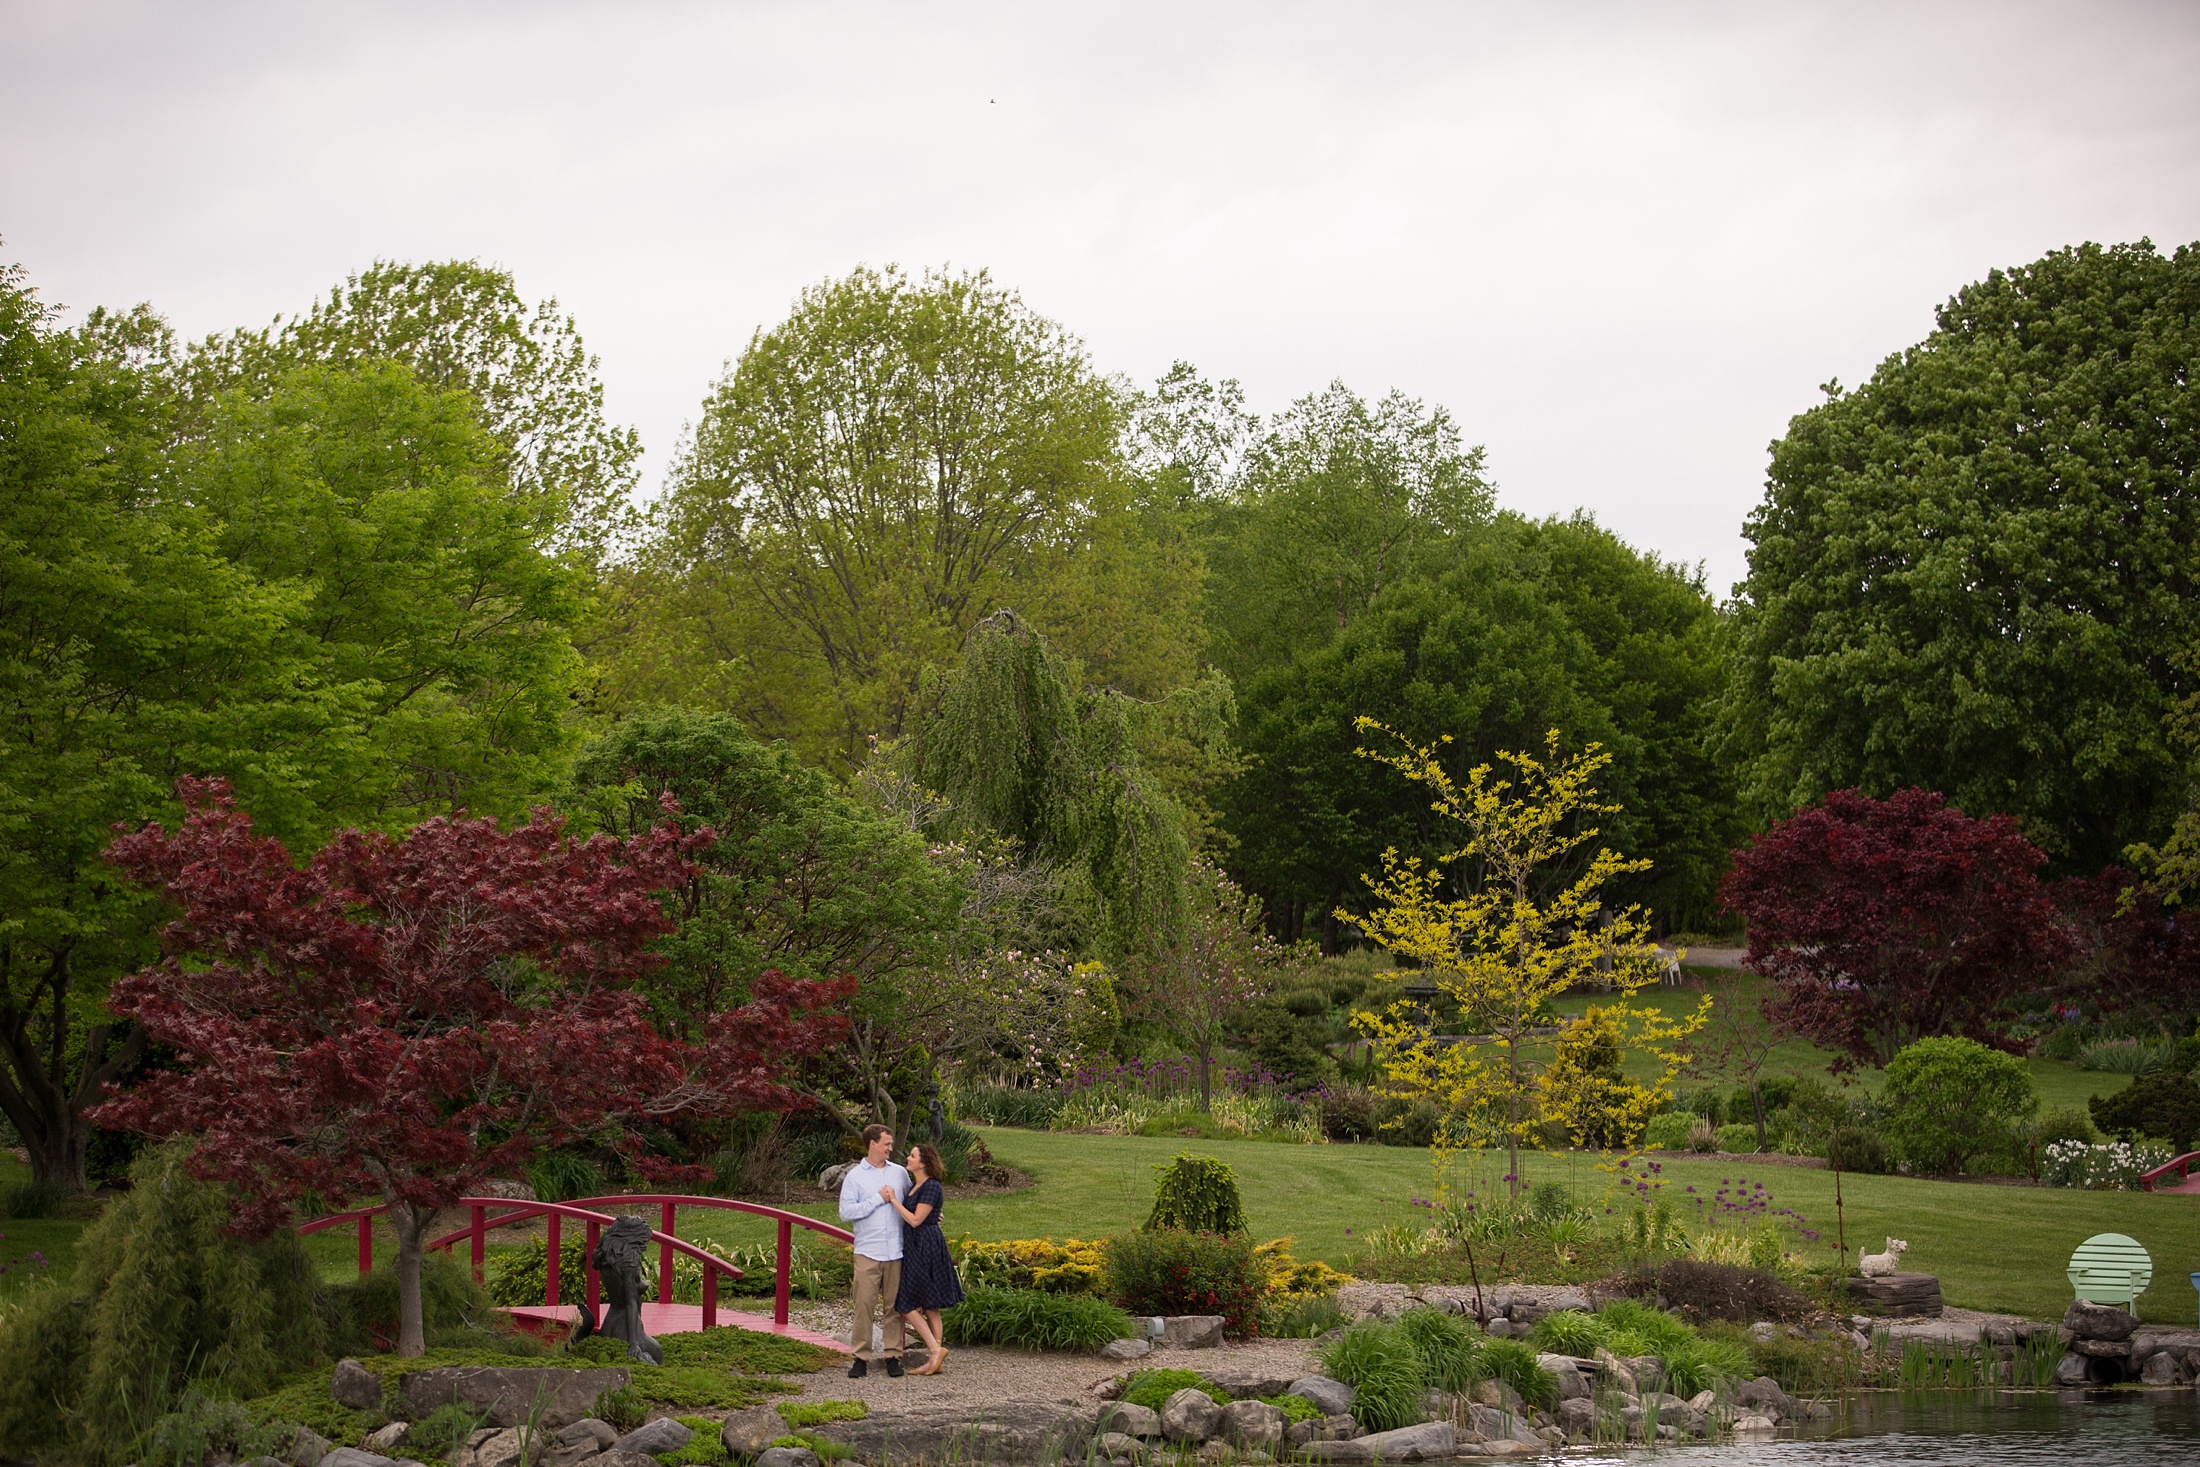 Spring Engagement Session at Sycamore Hill Gardens